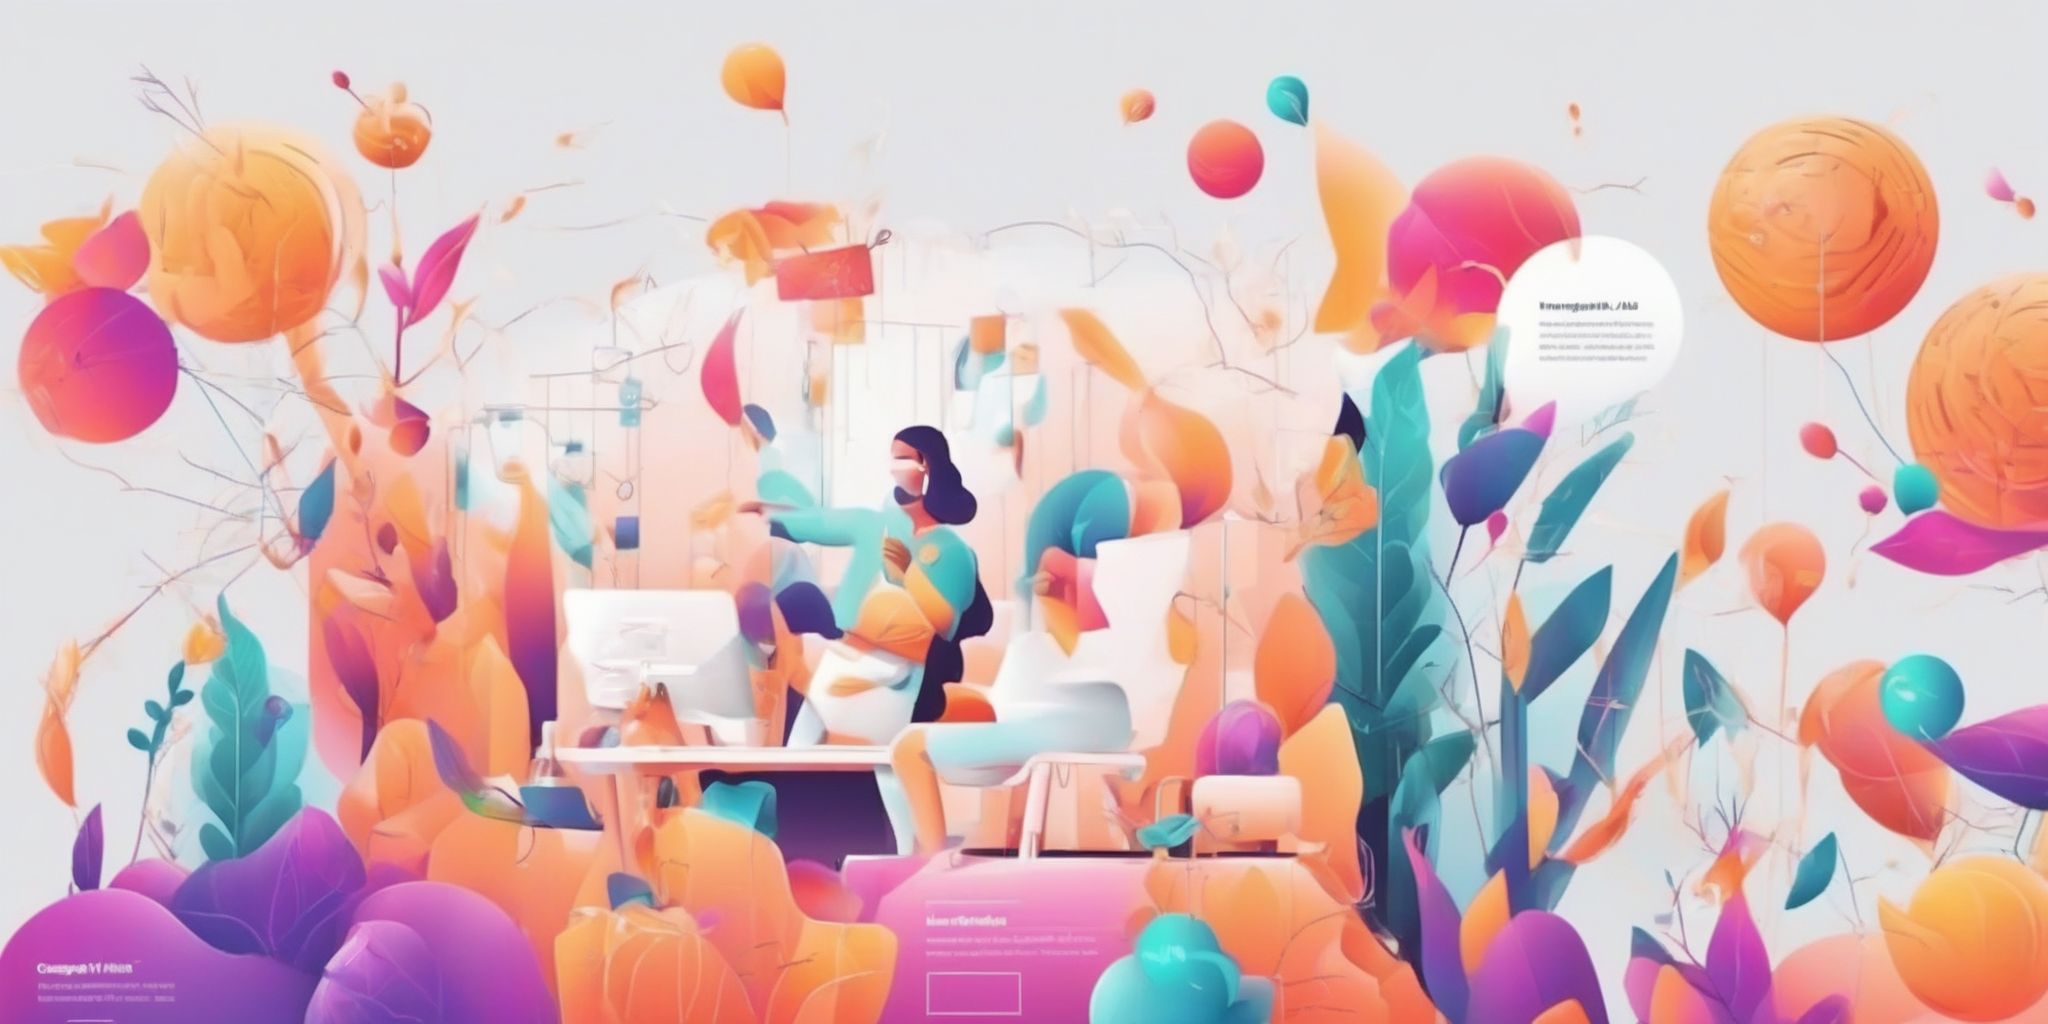 Ad campaigns in illustration style with gradients and white background